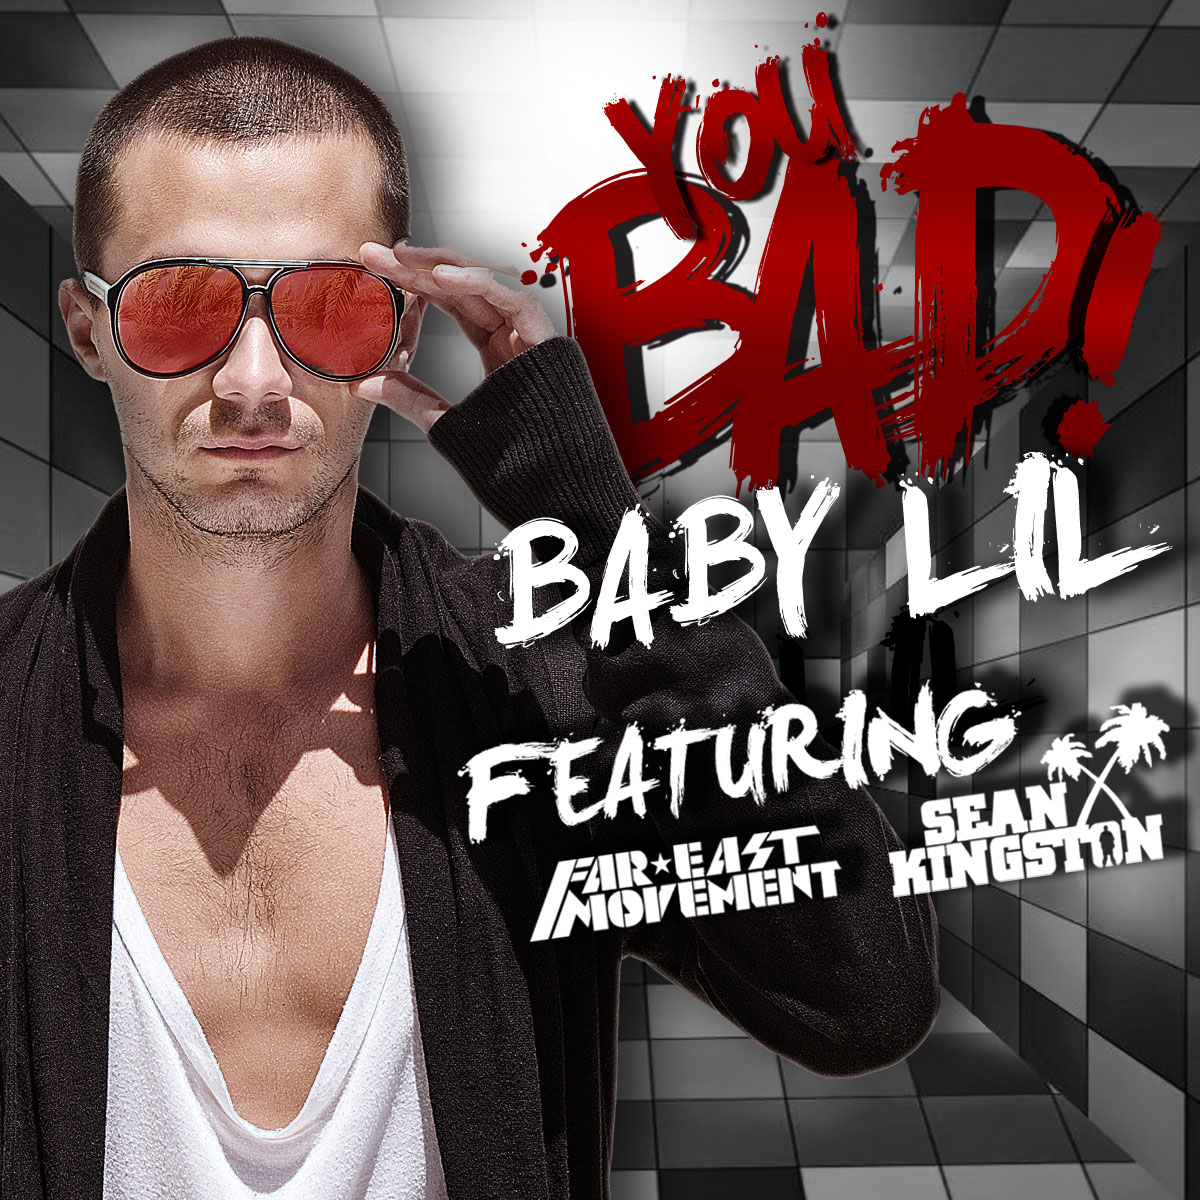 Baby Lil “You Bad” ft. Far East Movement & Sean Kingston (Audio)